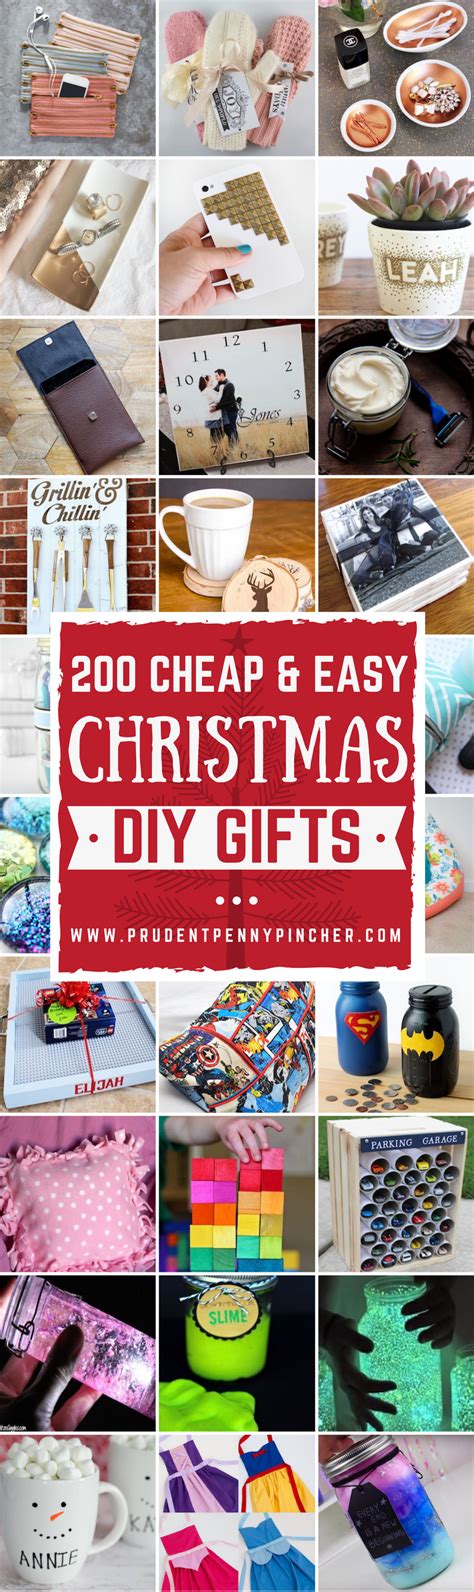 Diy christmas gifts to sell. 200 Cheap and Easy DIY Christmas Gifts - Prudent Penny Pincher